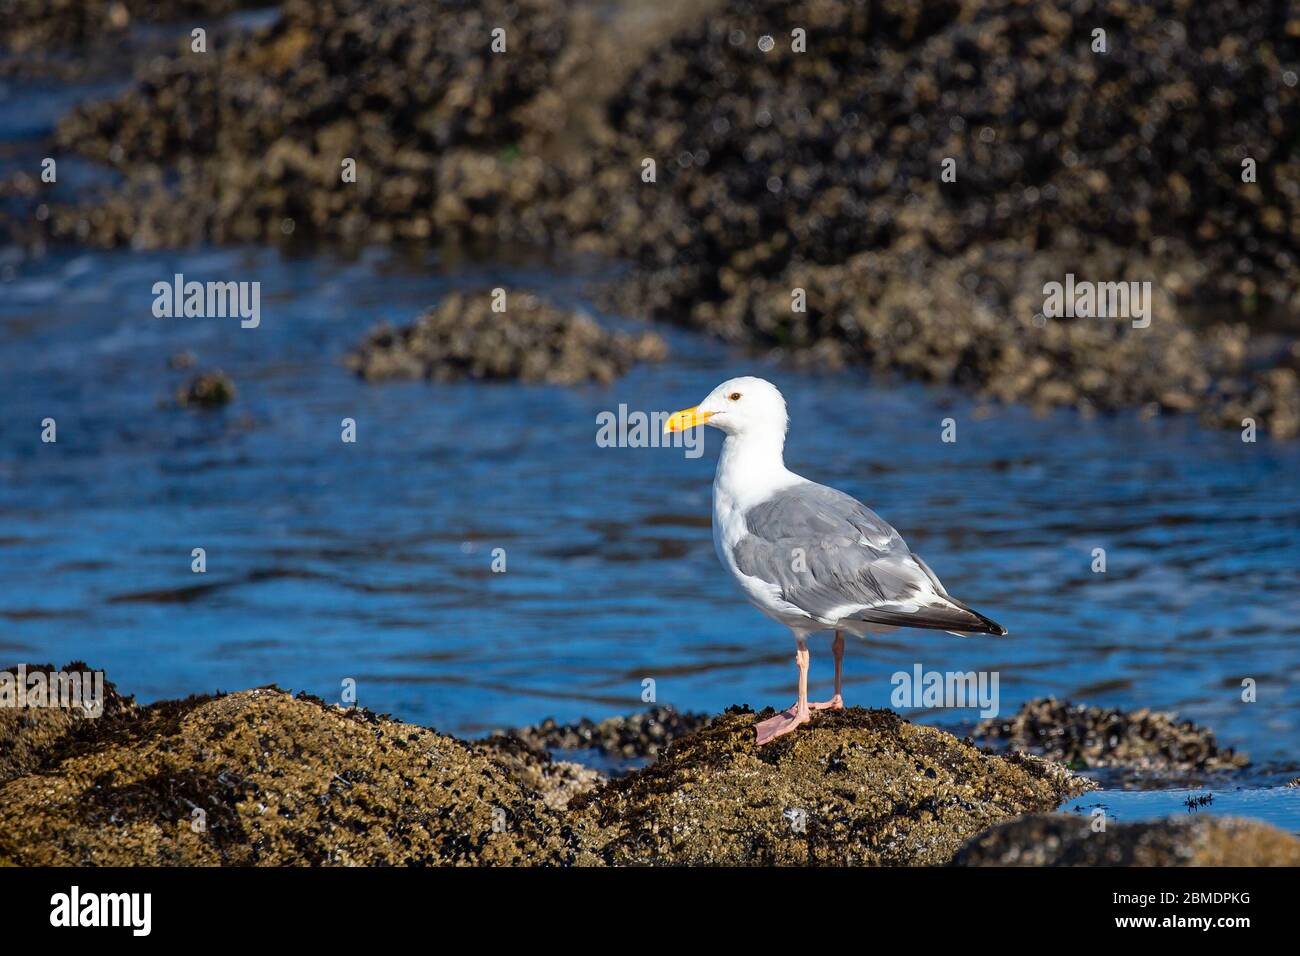 Western Gull (Larus occidentalis) standing on rocks next to the Pacific Ocean, horizontal Stock Photo